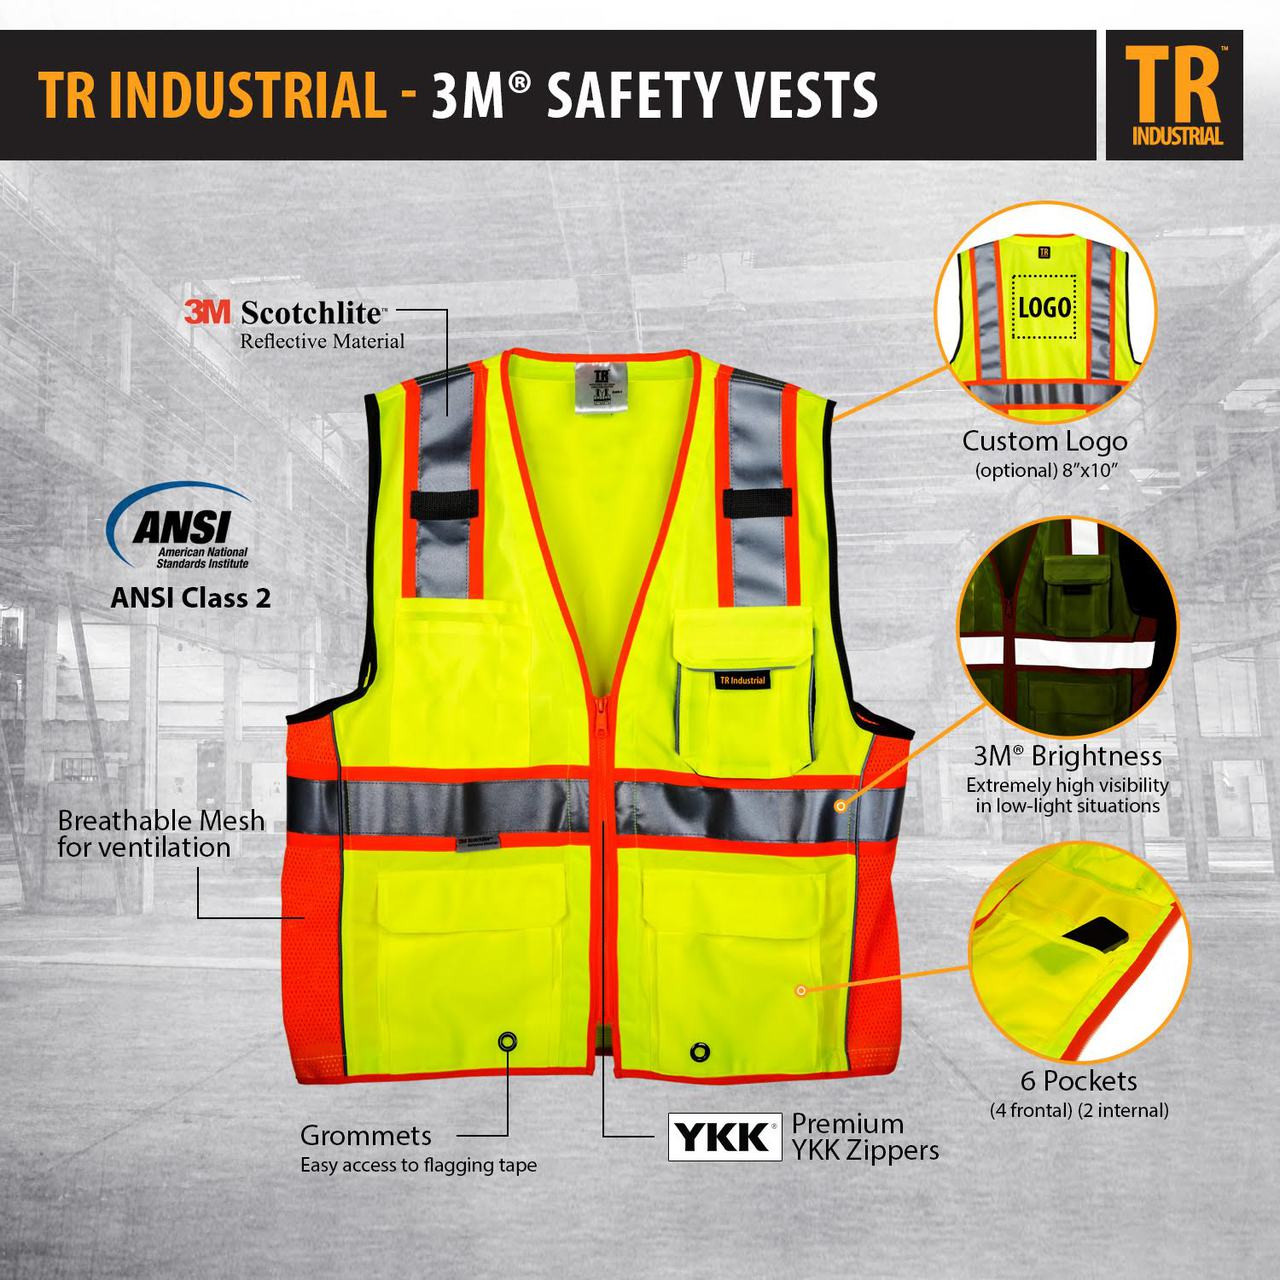 TR Industrial 3M Safety Vest with Pockets and Zipper, Class 2, Size M